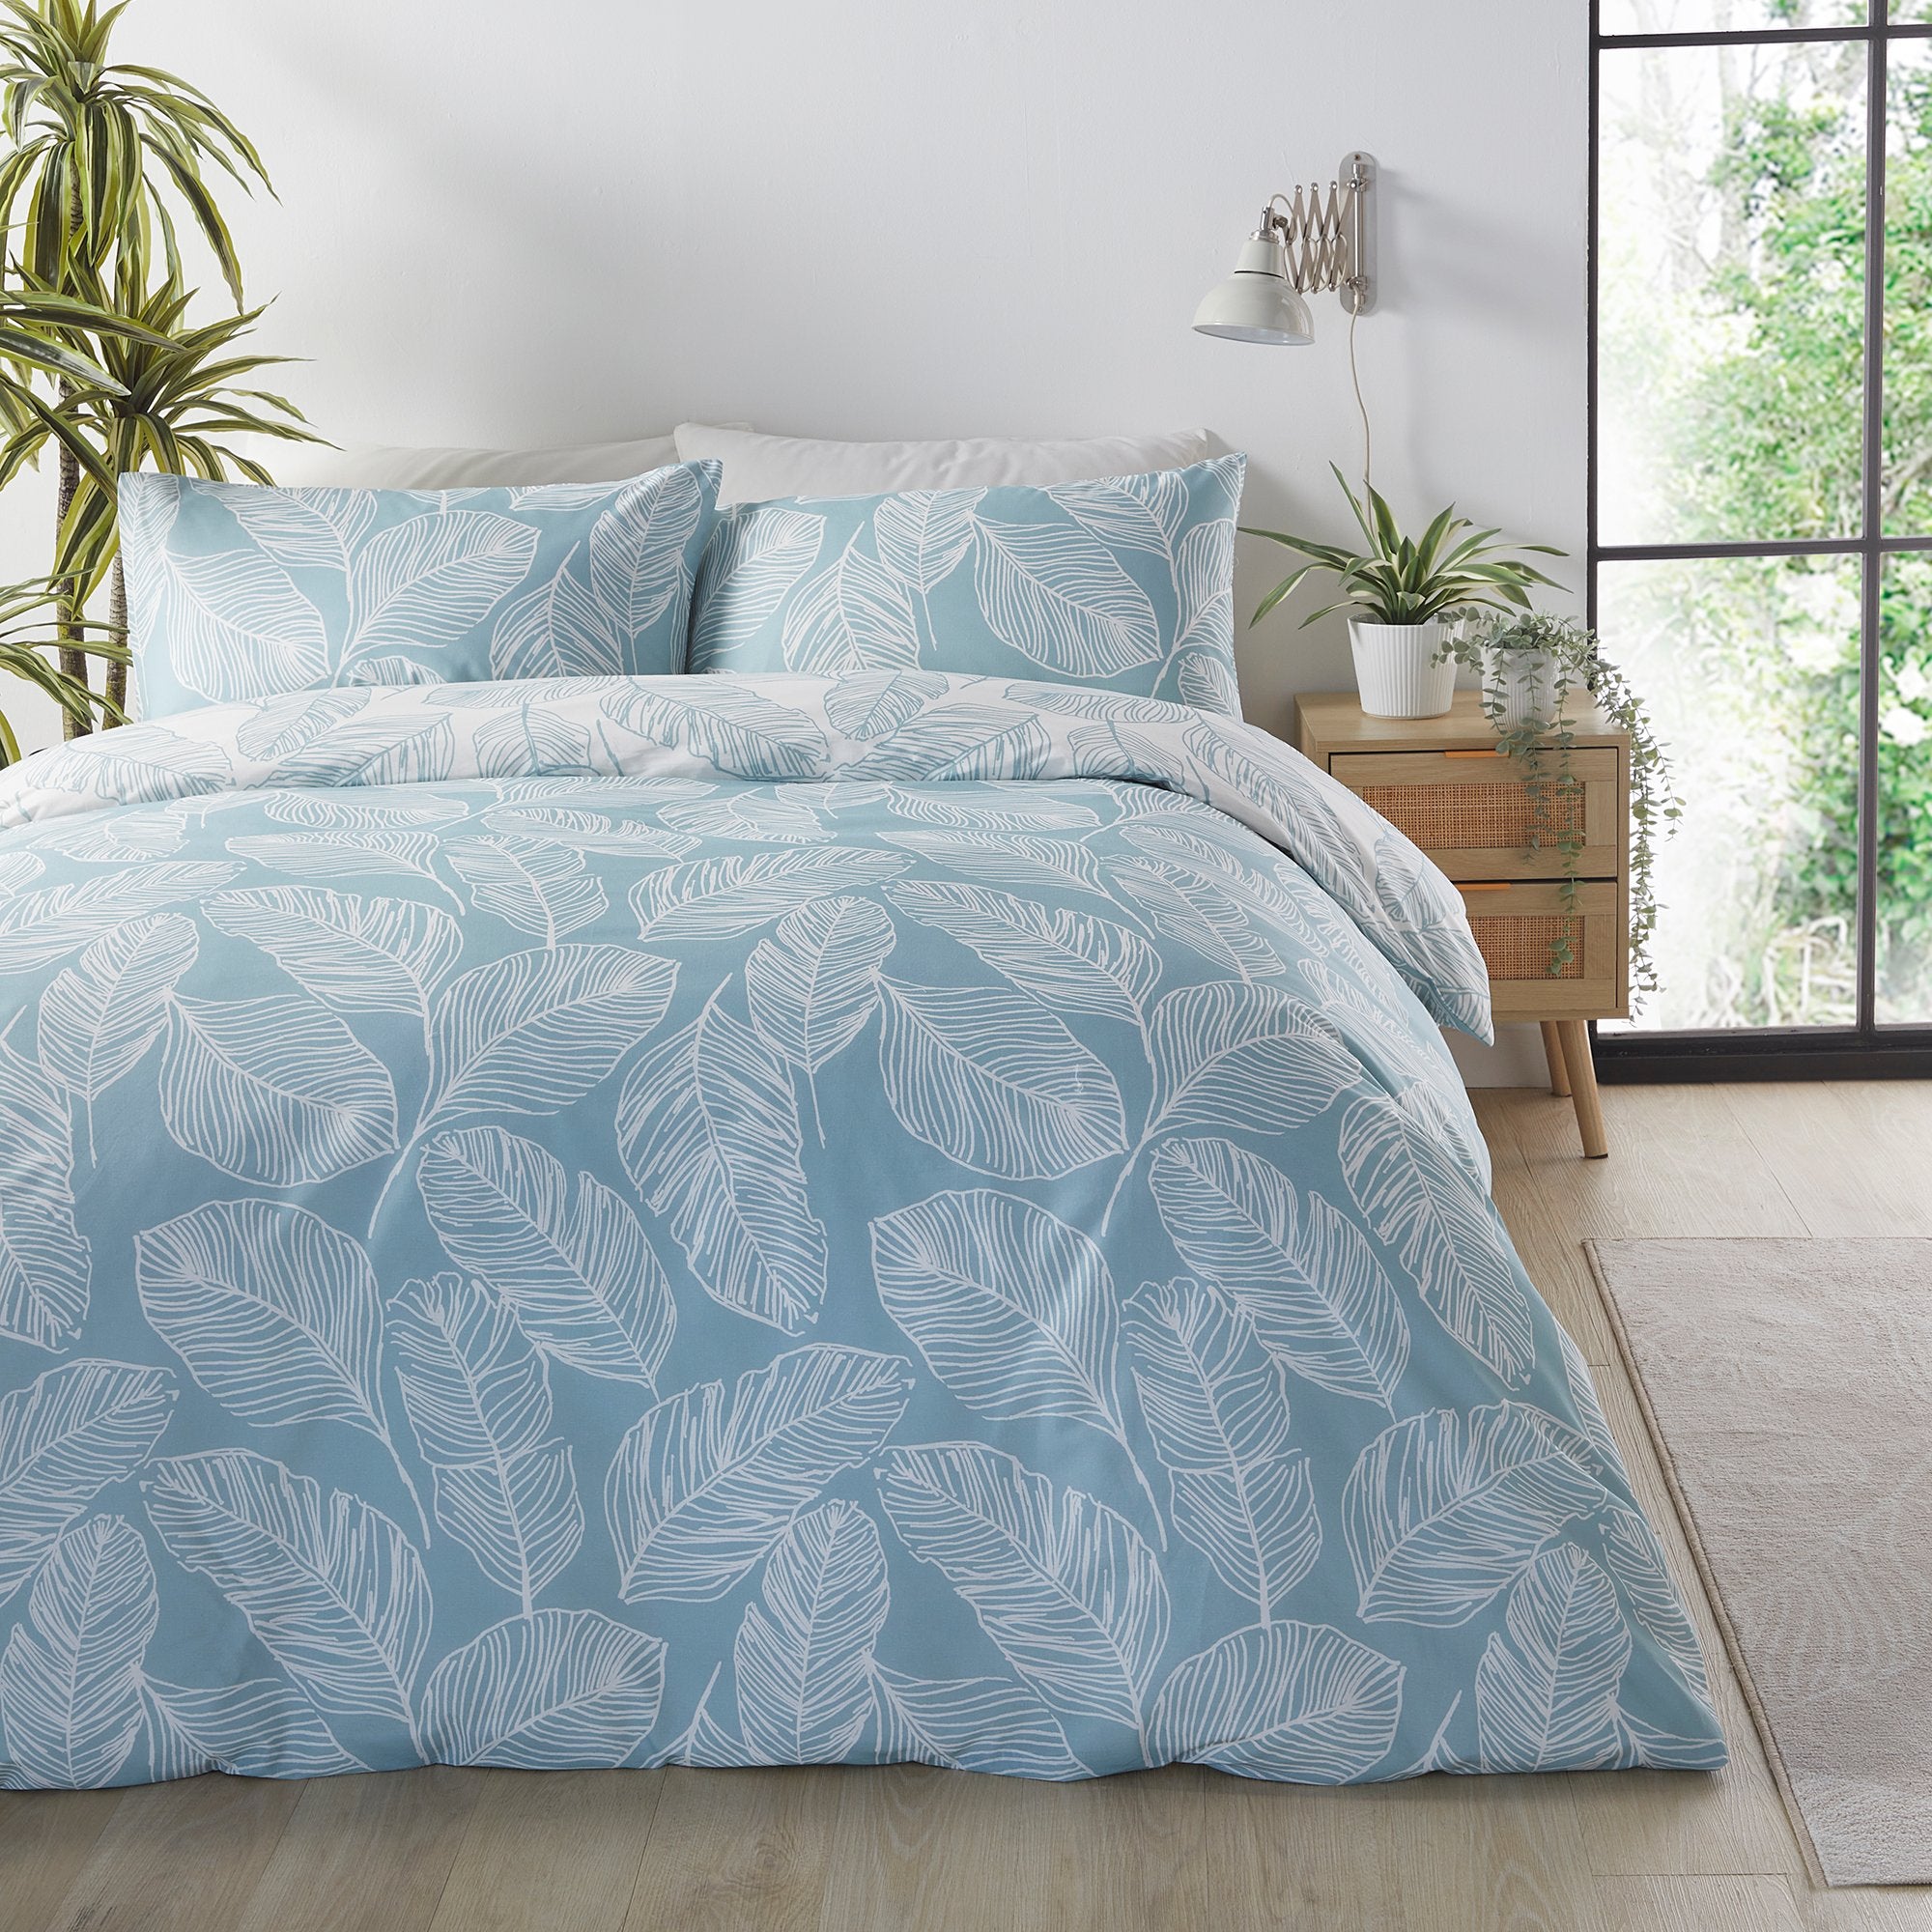 Duvet Cover Set Matteo by Fusion in Duck Egg